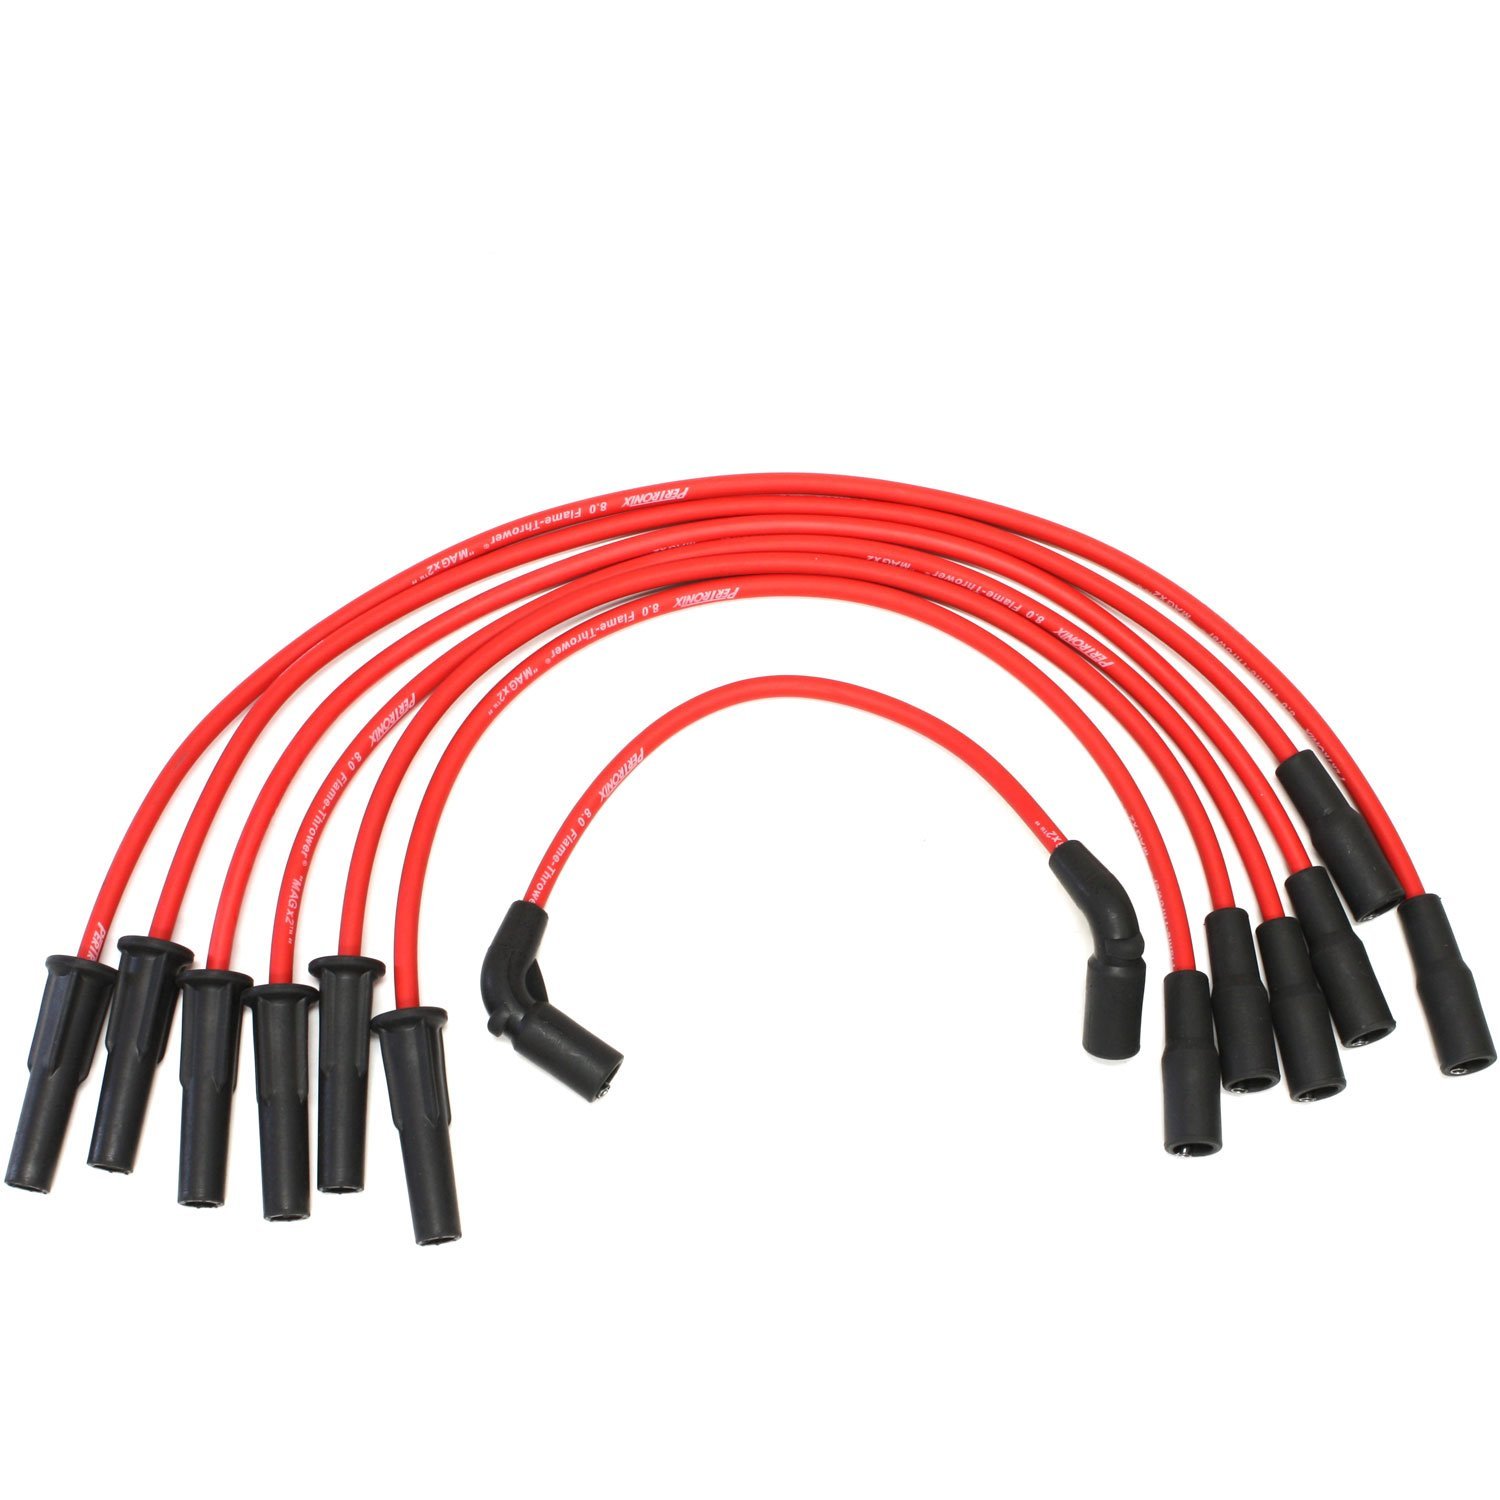 PerTronix 806425 Flame-Thrower Spark Plug Wires 6 cyl GM Custom Fit Red